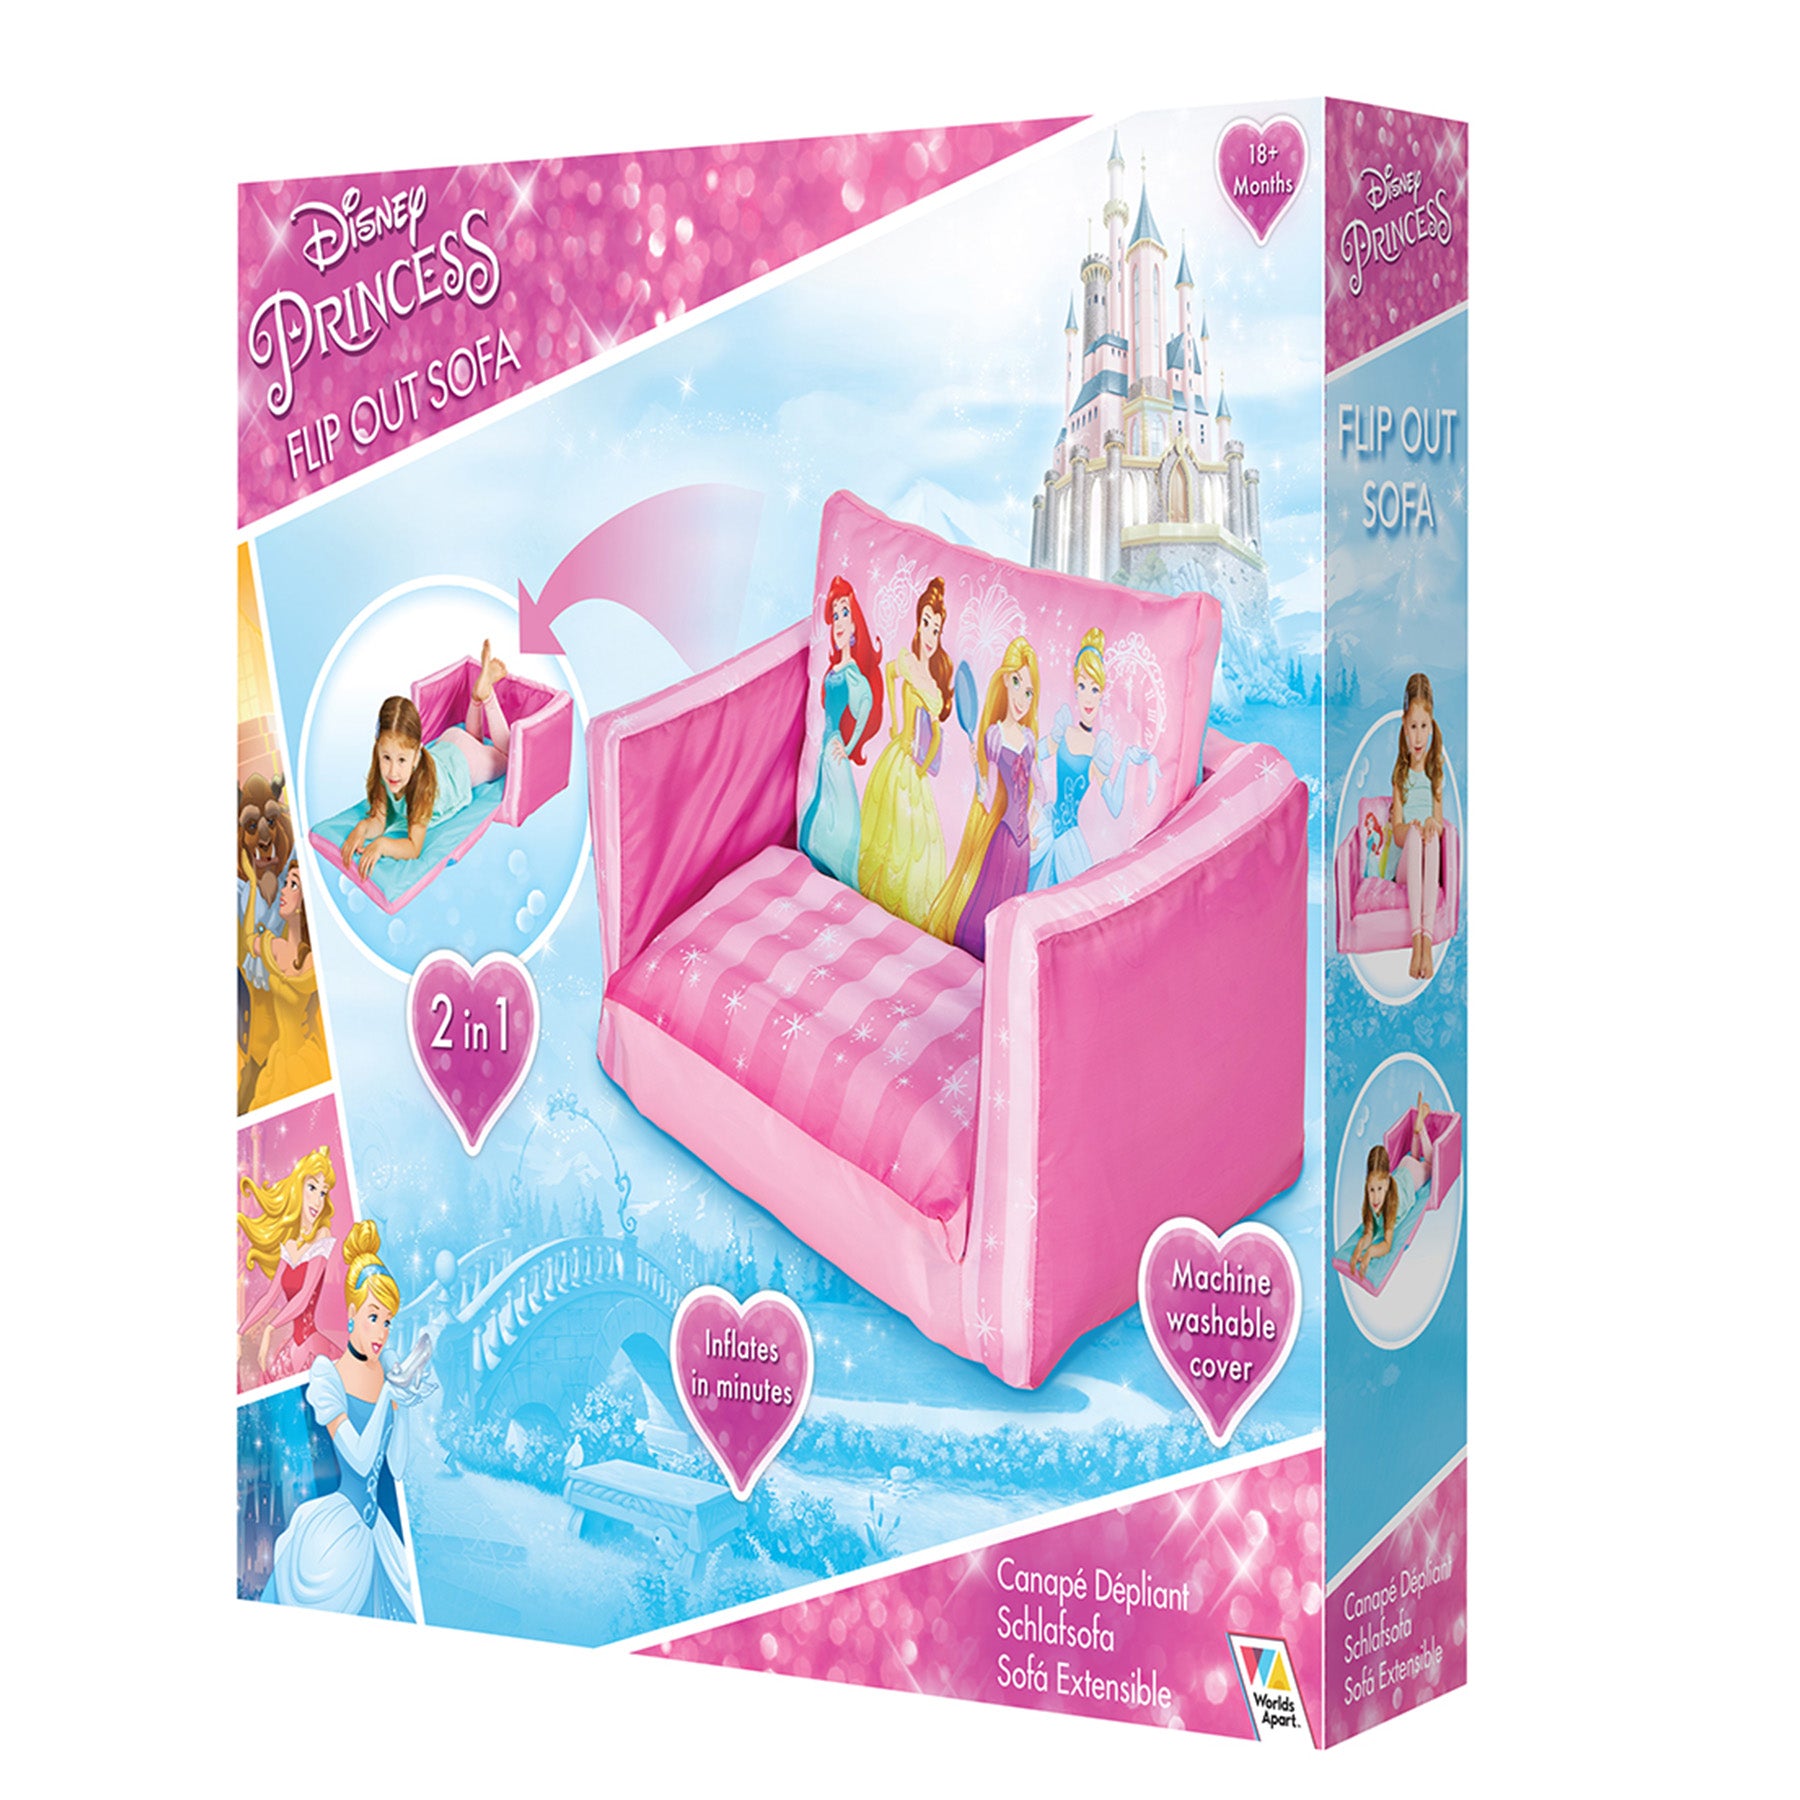 2 in 1 princess sofa & inflatable chair